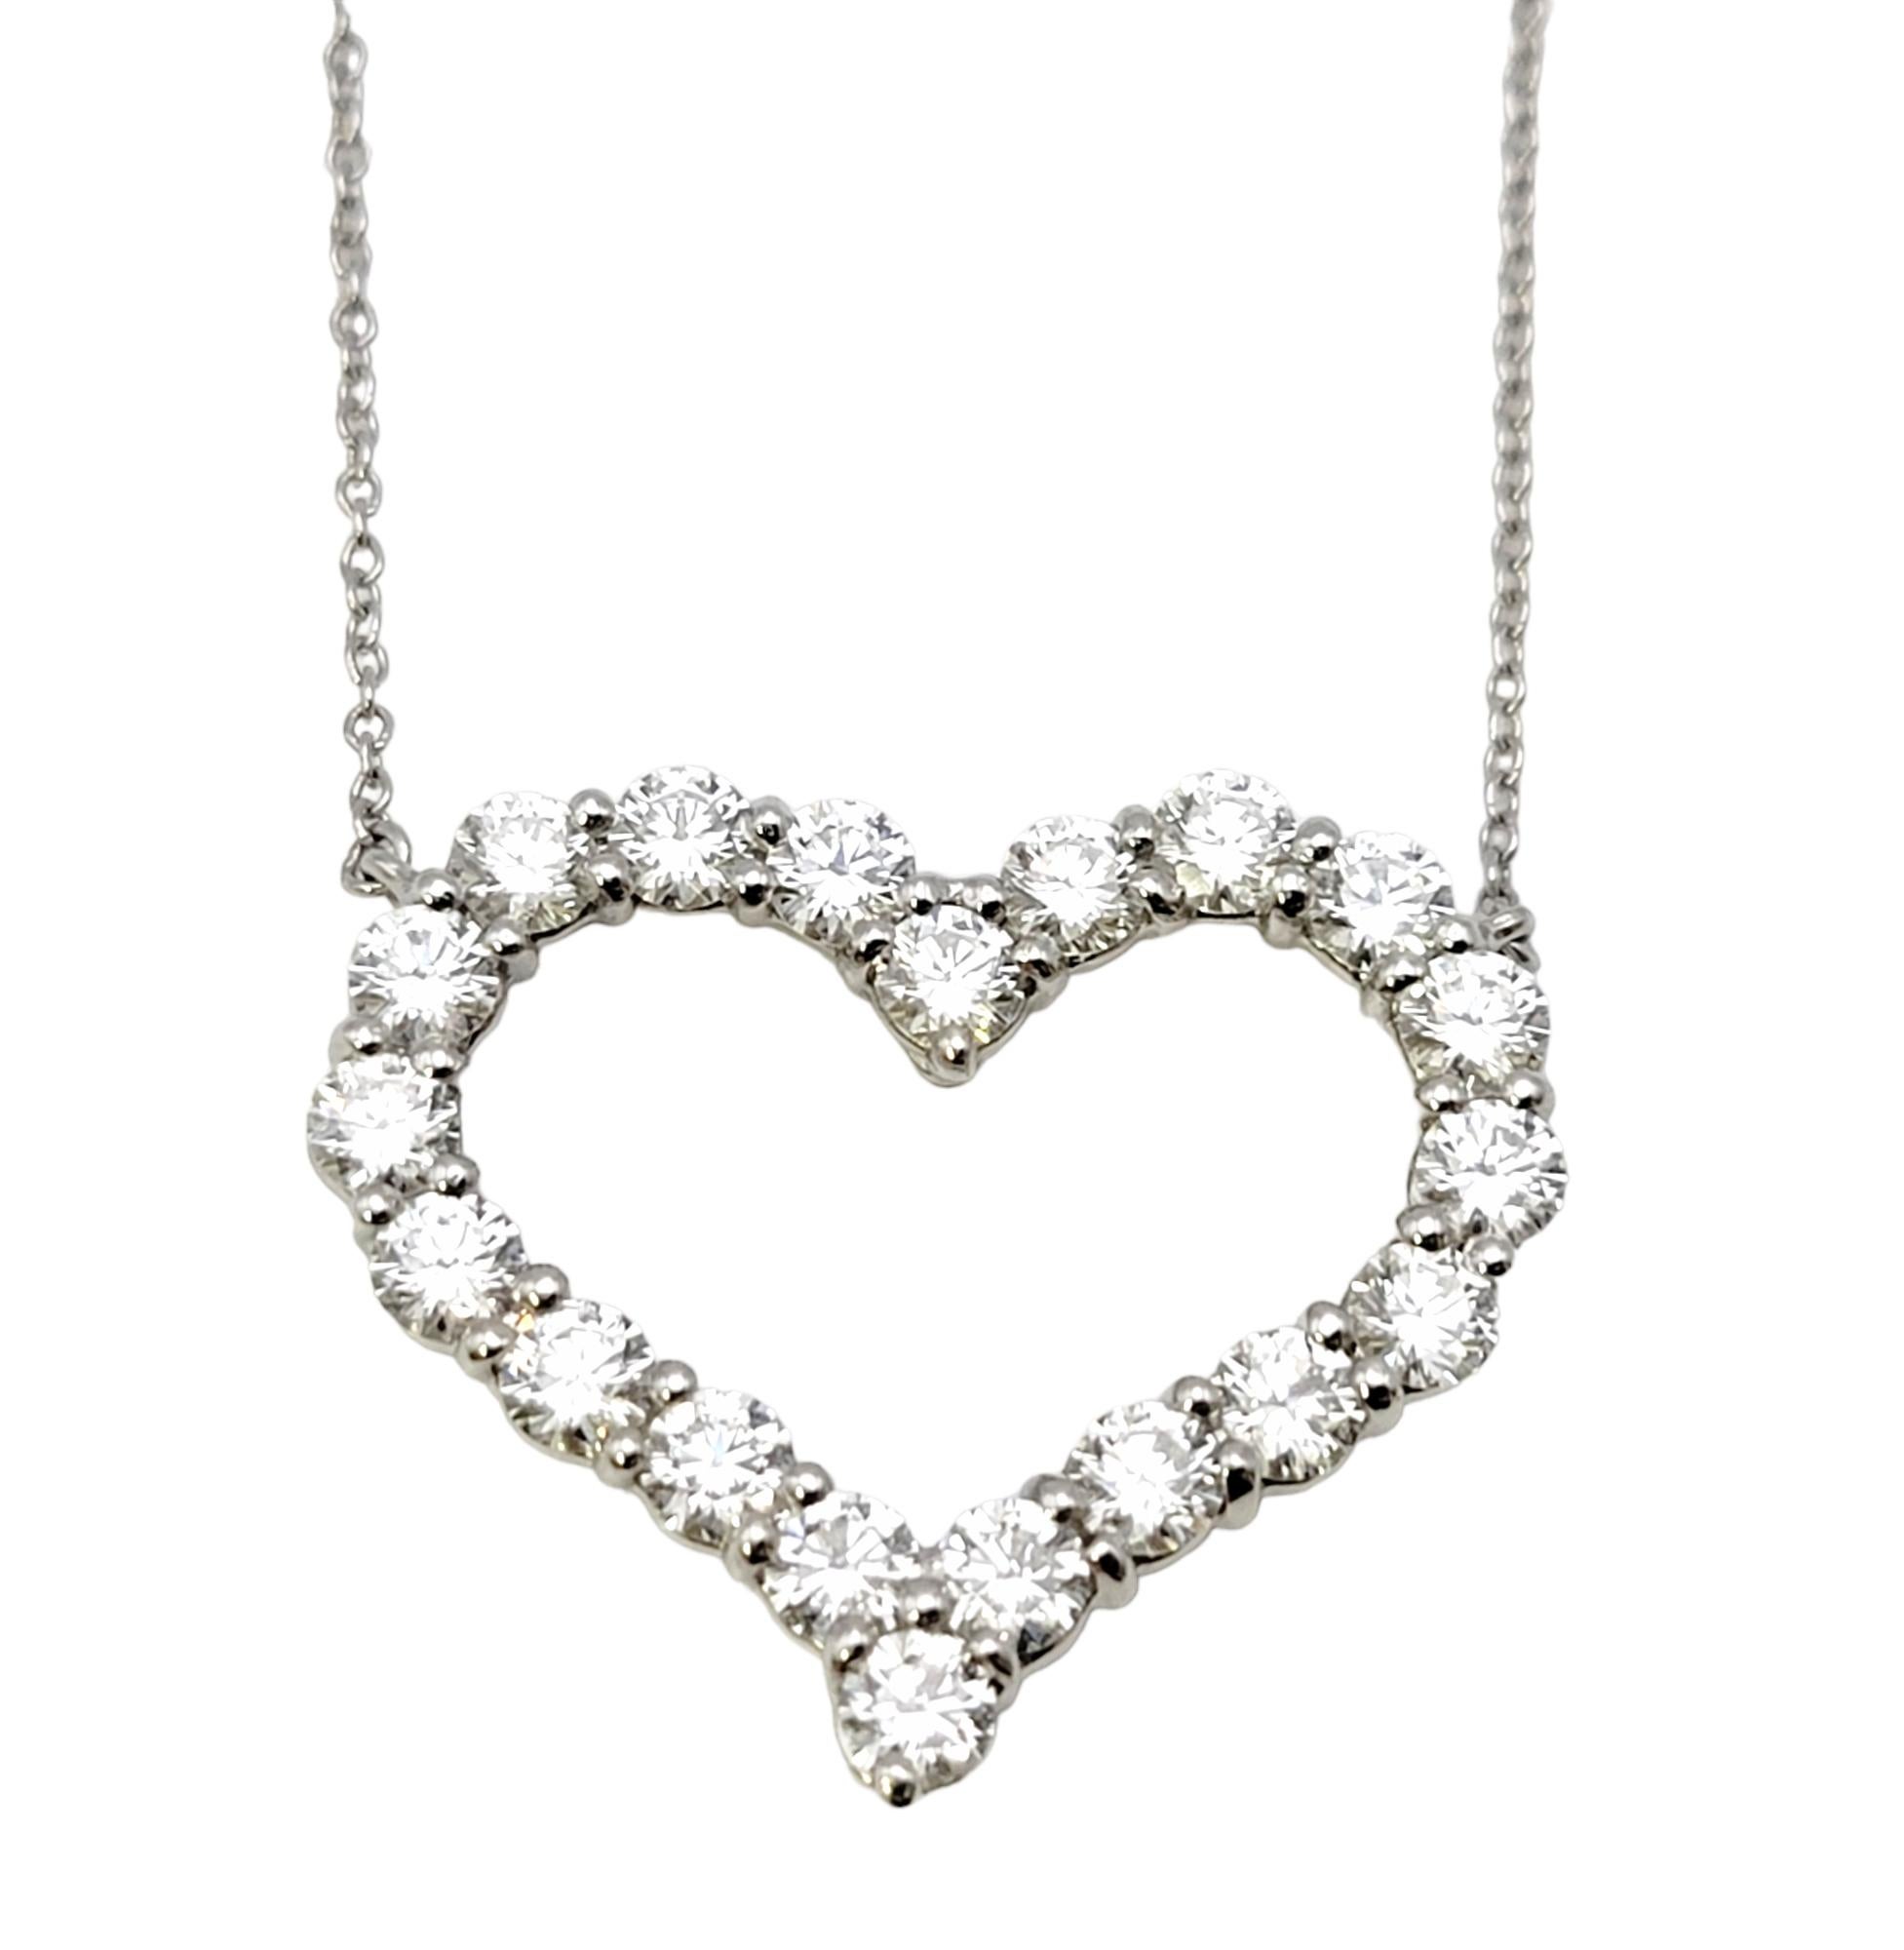 You will fall head over heels in love with this breathtaking diamond open heart pendant necklace from renowned jeweler, Tiffany & Co. This incredible necklace truly sparkles from every angle and looks absolutely radiant on the neck! 

This gorgeous